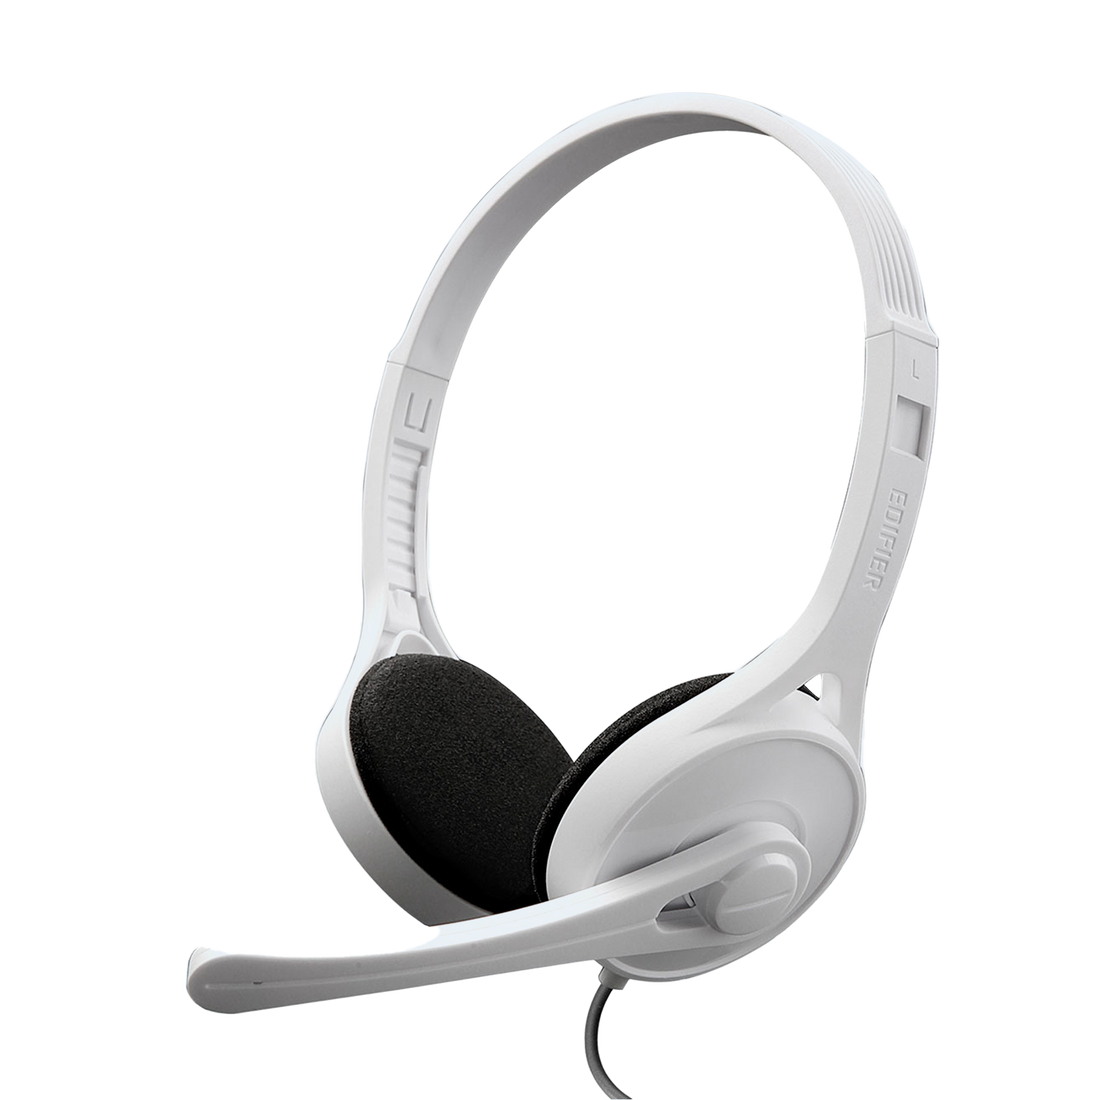 K550 Basic Computer Headset Crystal clear communication